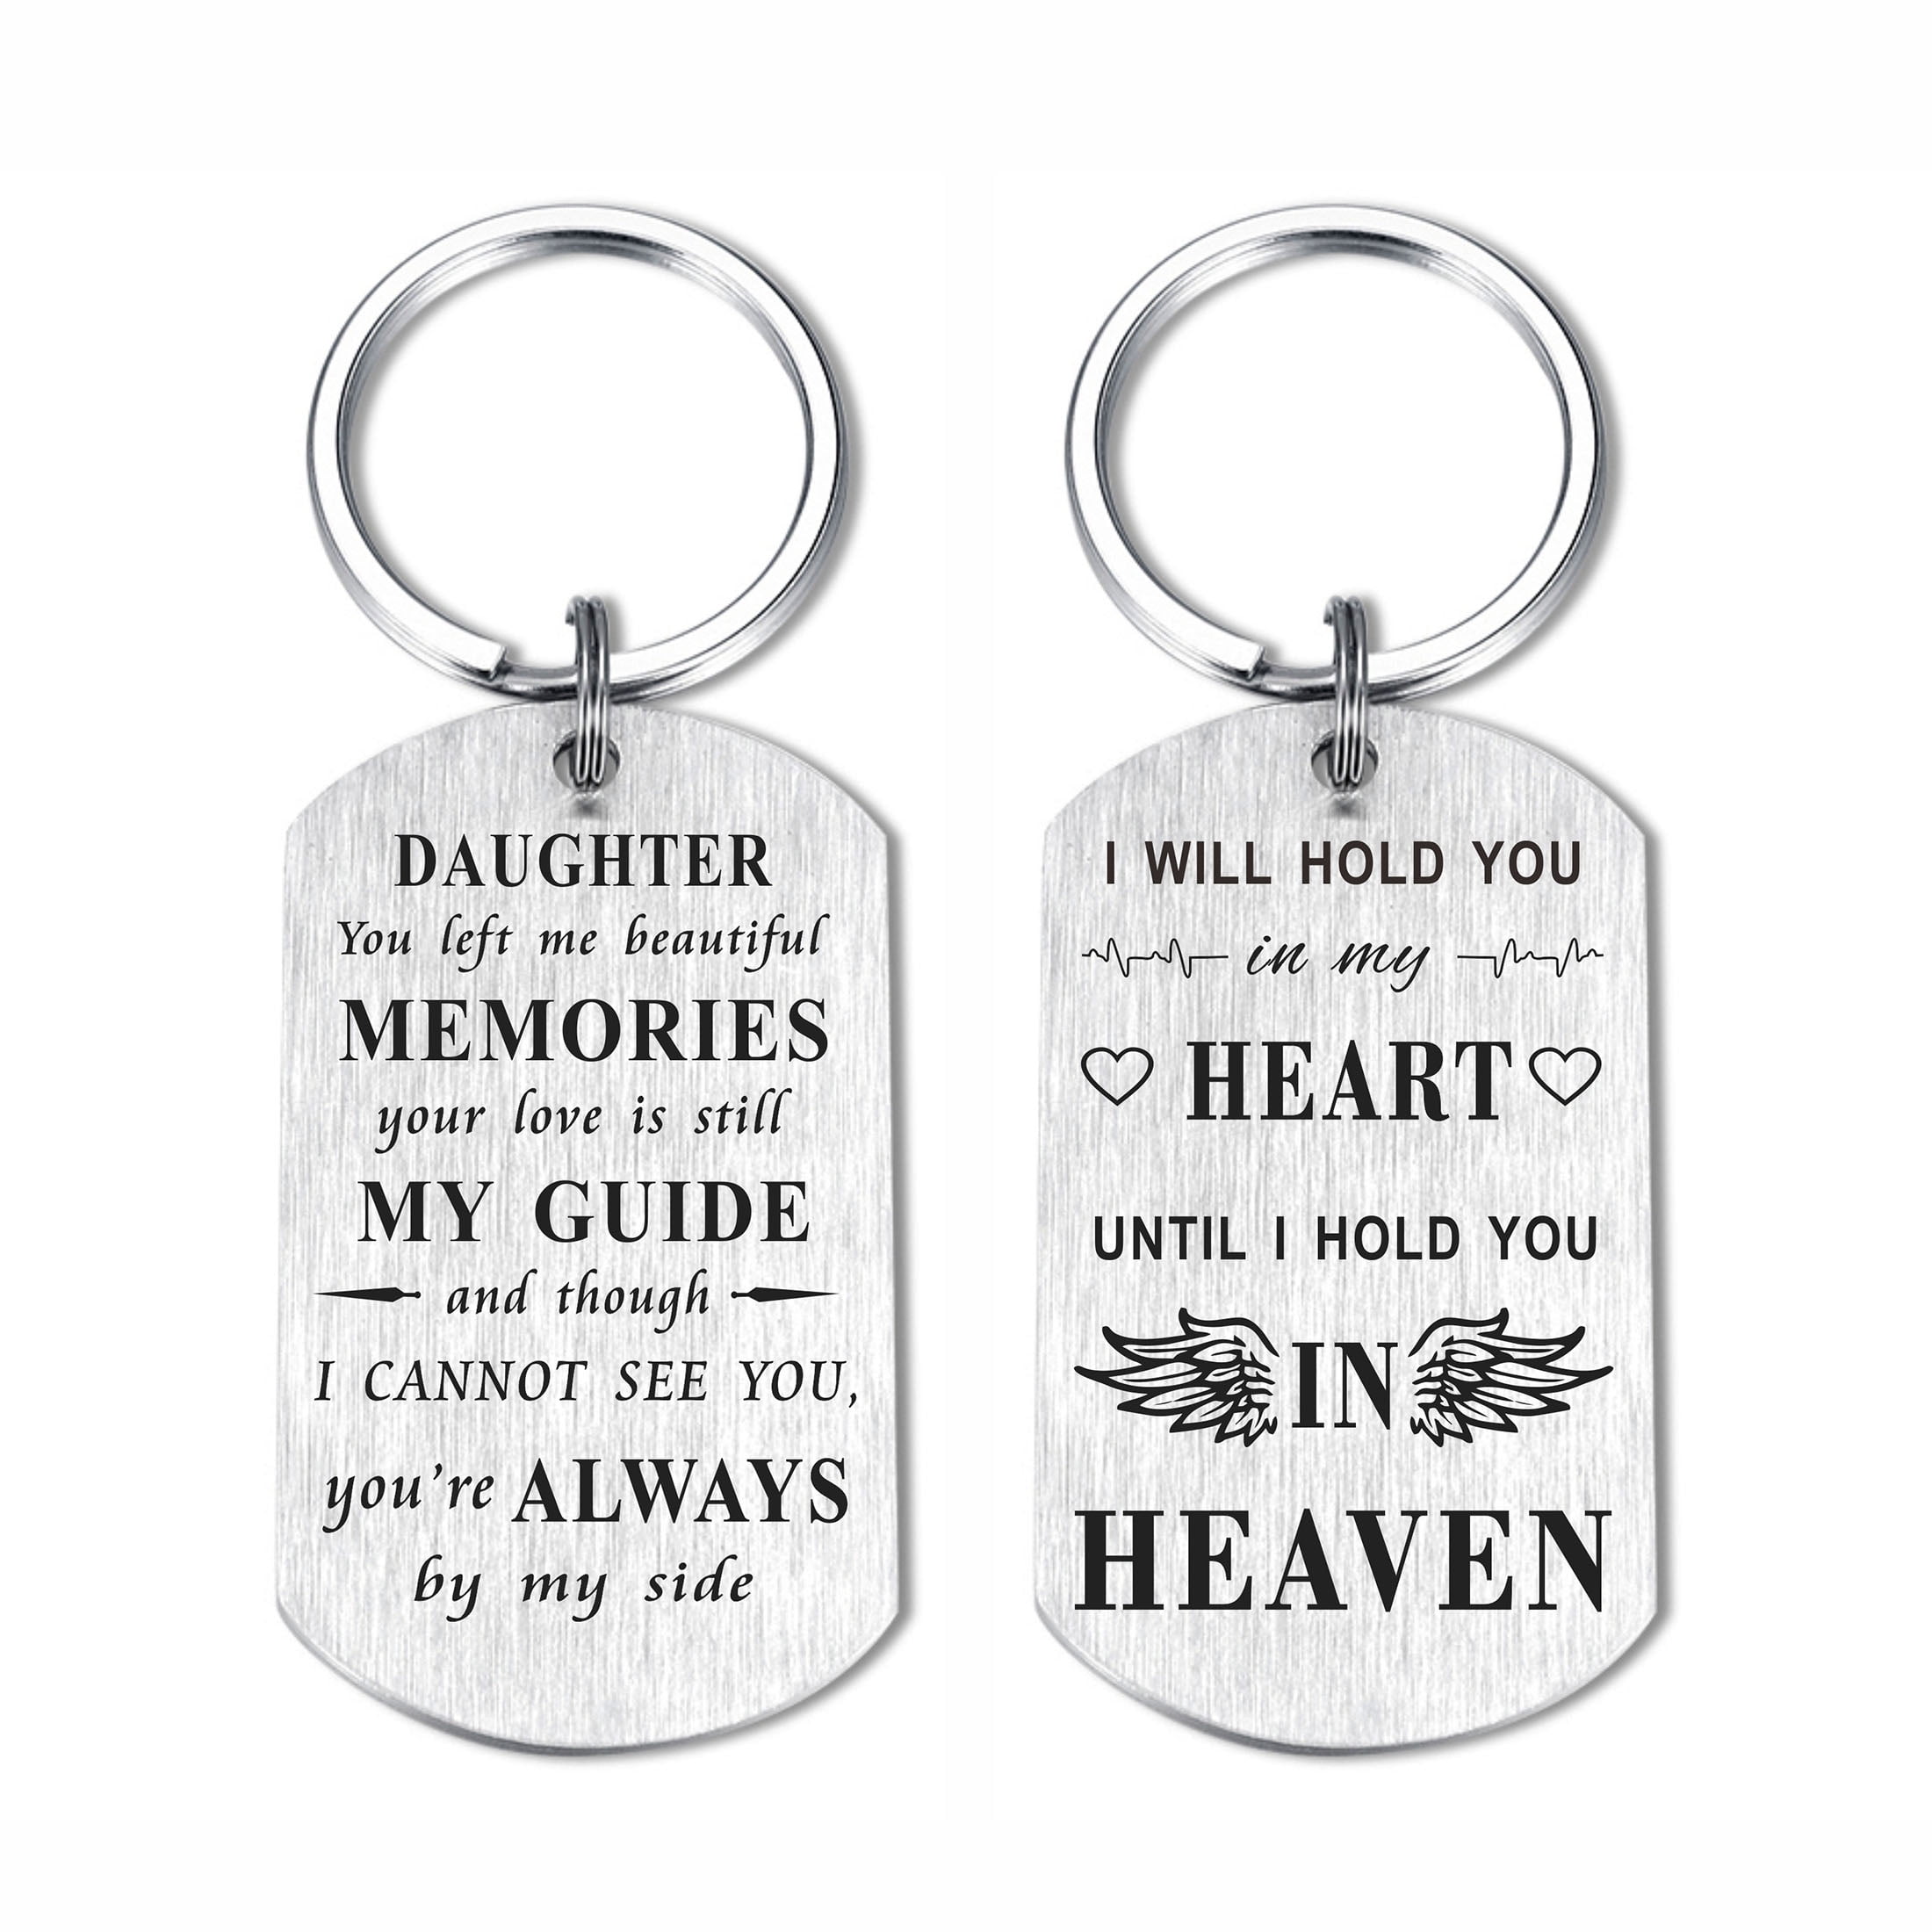 DEGASKEN Memorial Gift for Loss of Grandpa, Sympathy Gifts, My Heart Is in Heaven, Bereavement Gifts for Loss of Grandfather, Metal Keychain, Adult